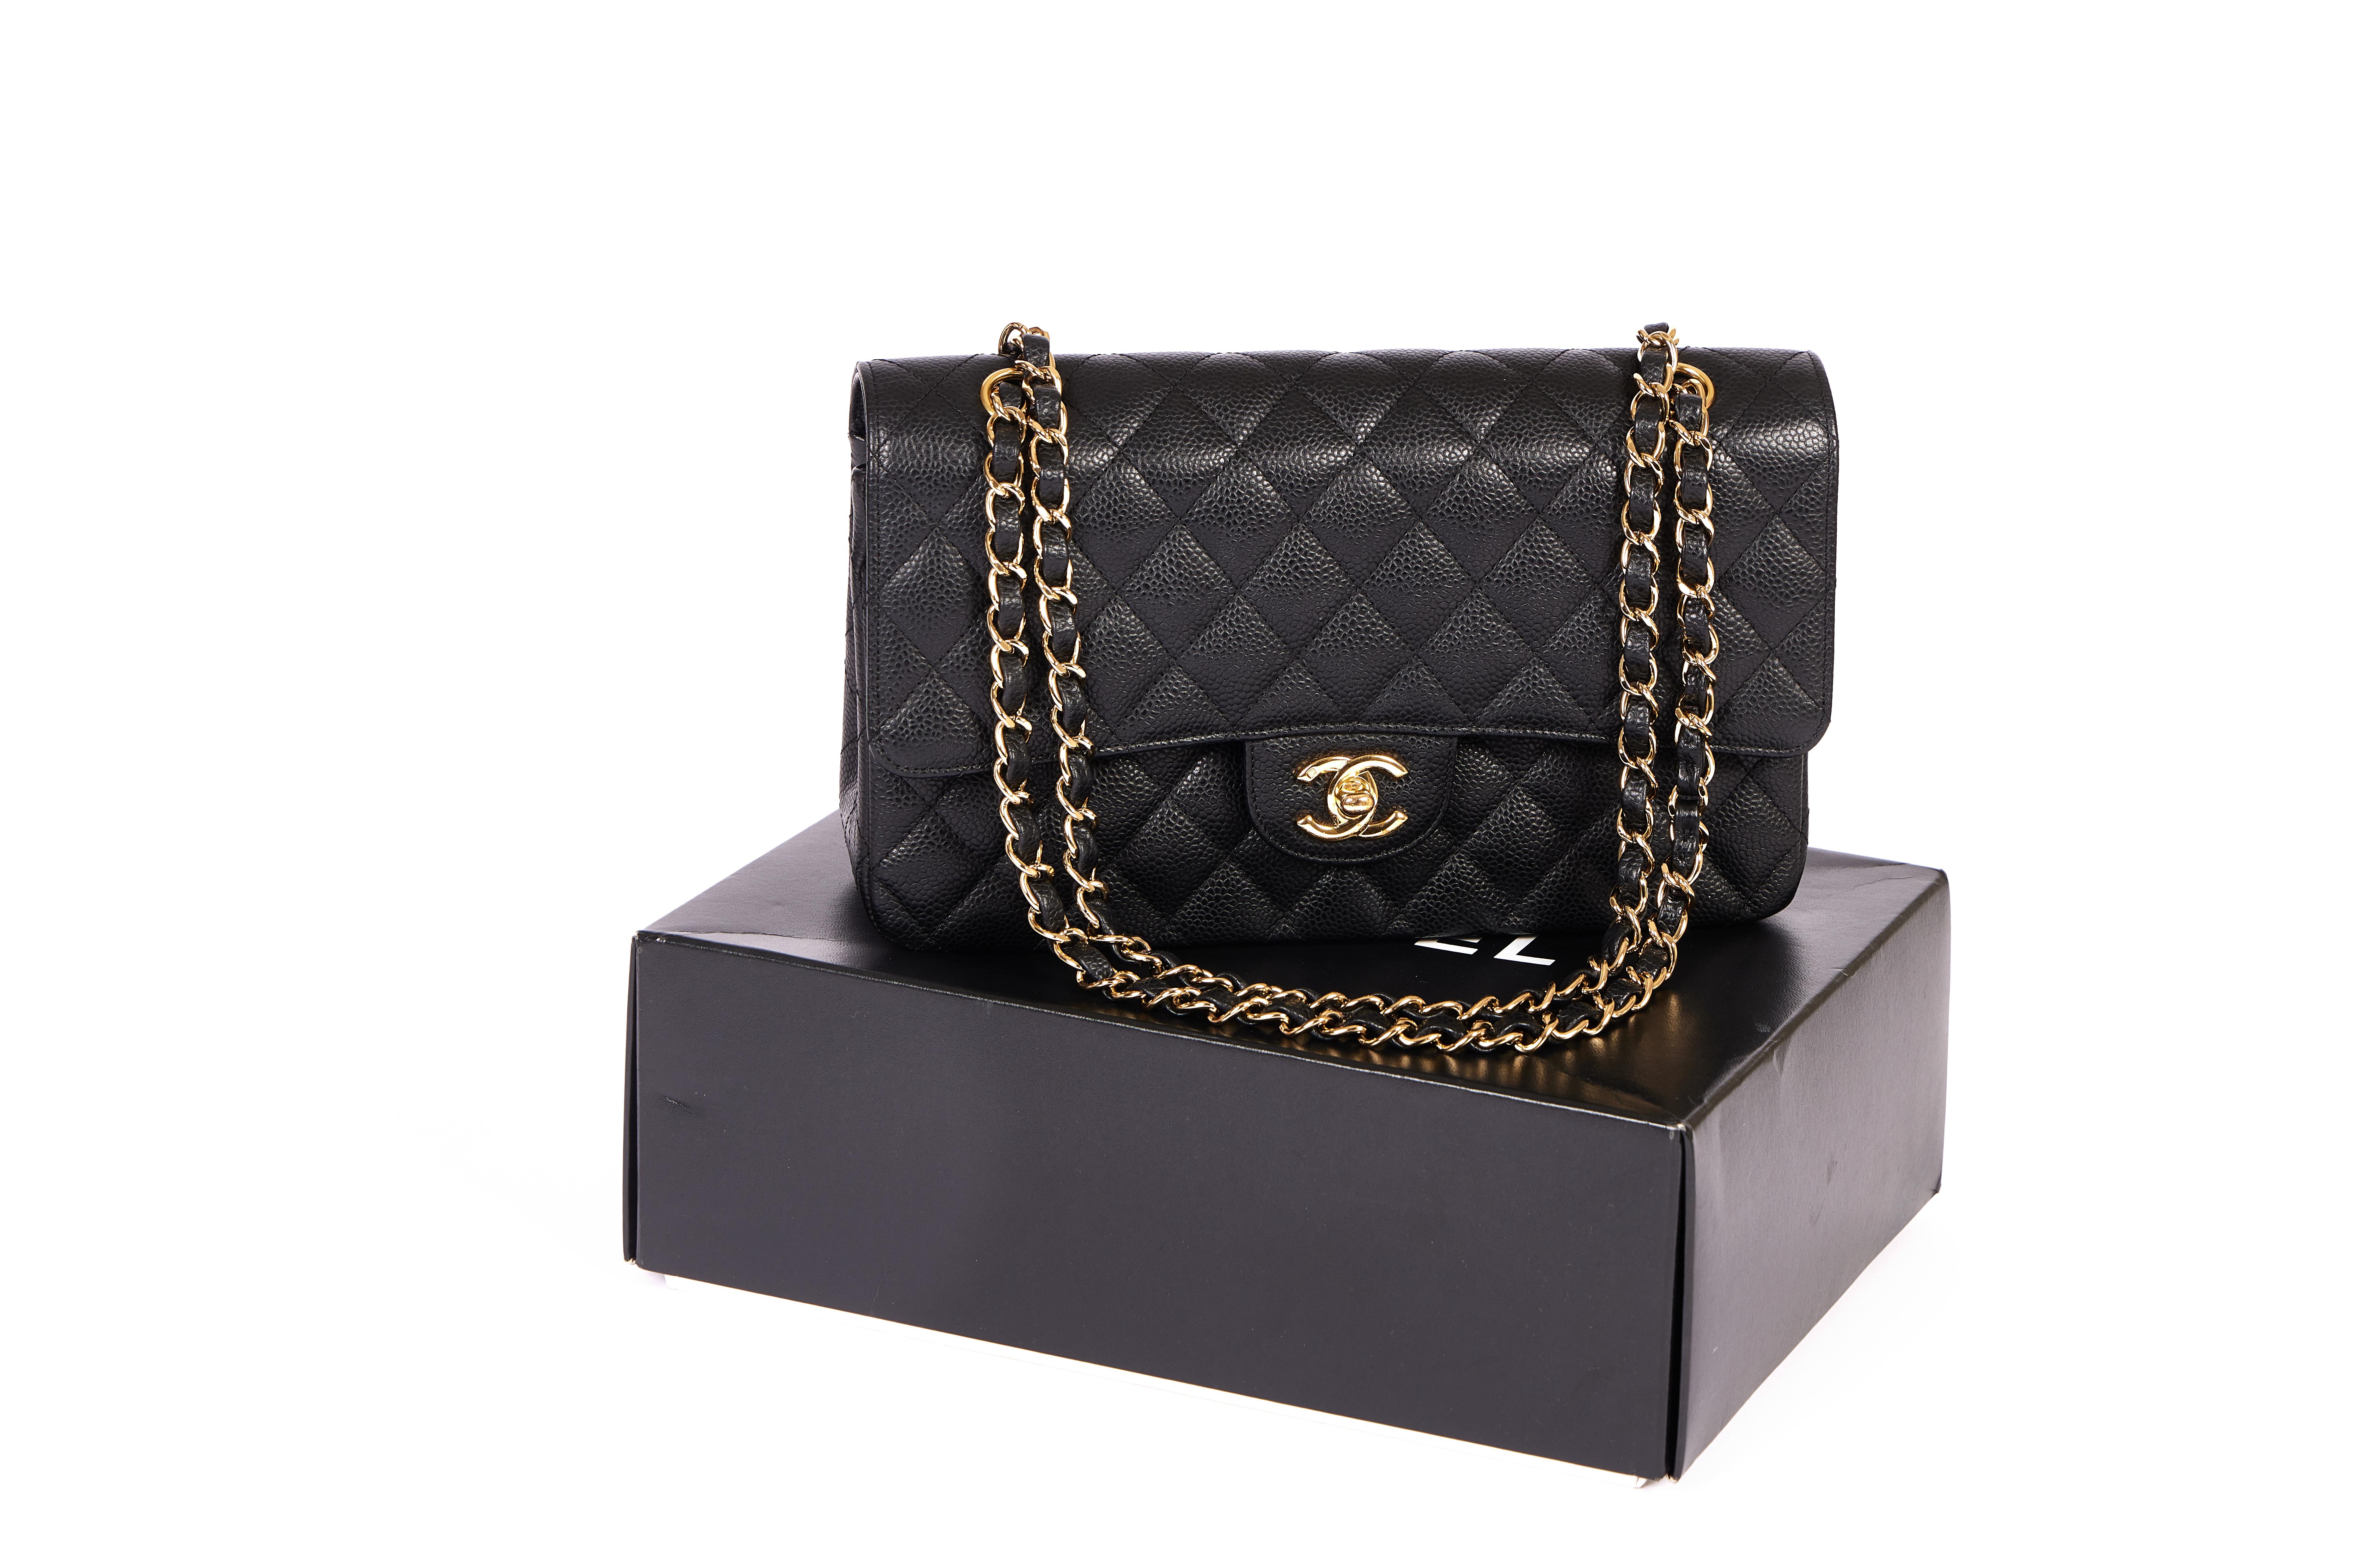 This classic Chanel Caviar double flap comes in black with the golden chain and the double CC logo in front. It's the perfect cross body bag and made for every occasion. This bag comes with a Chanel box, the booklet and inventory card. The hologram